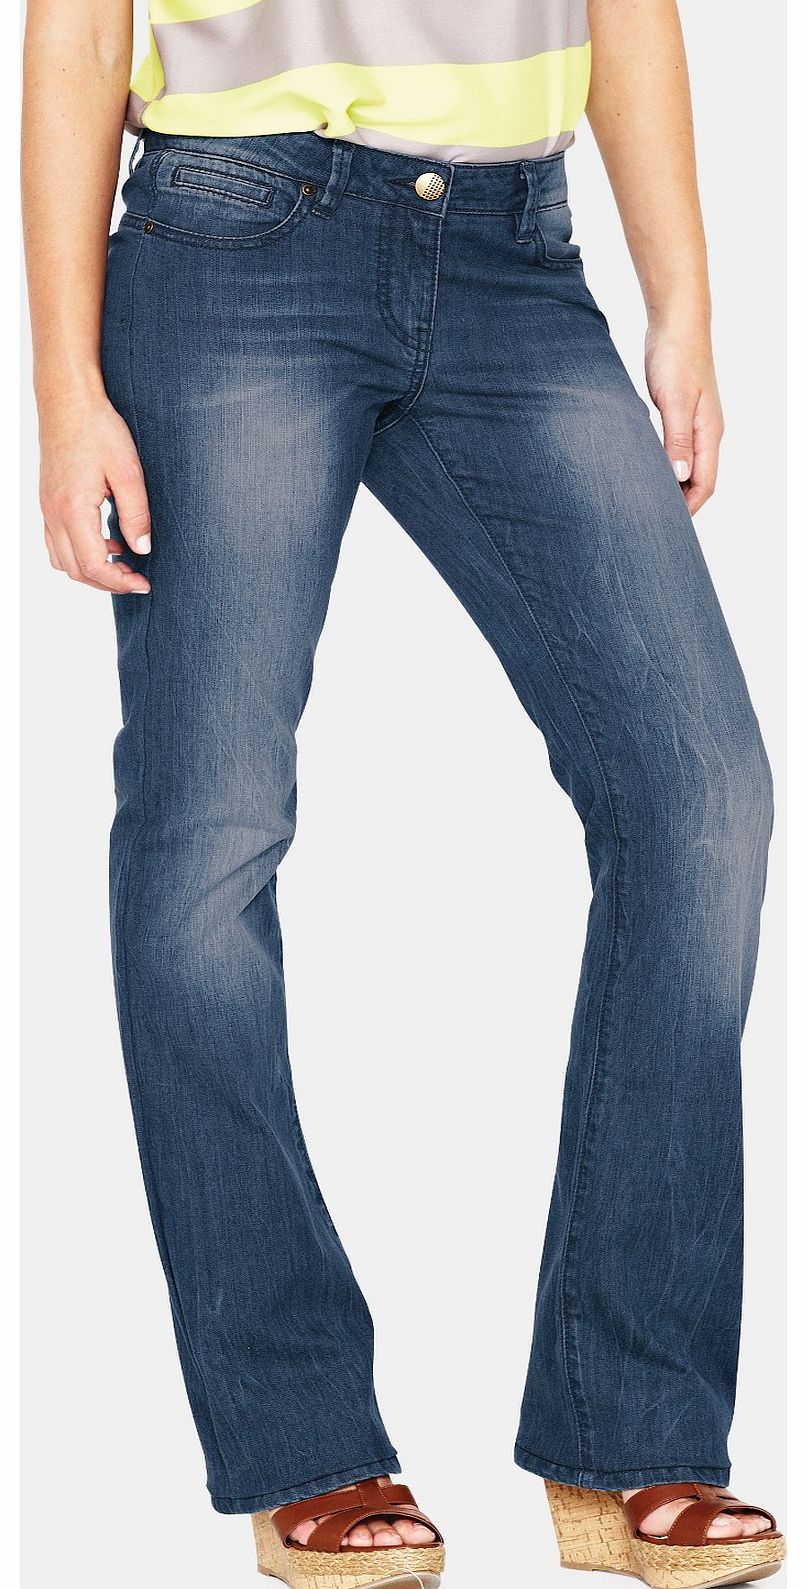 South Tall Curvalicious Wonder Bootcut Jeans